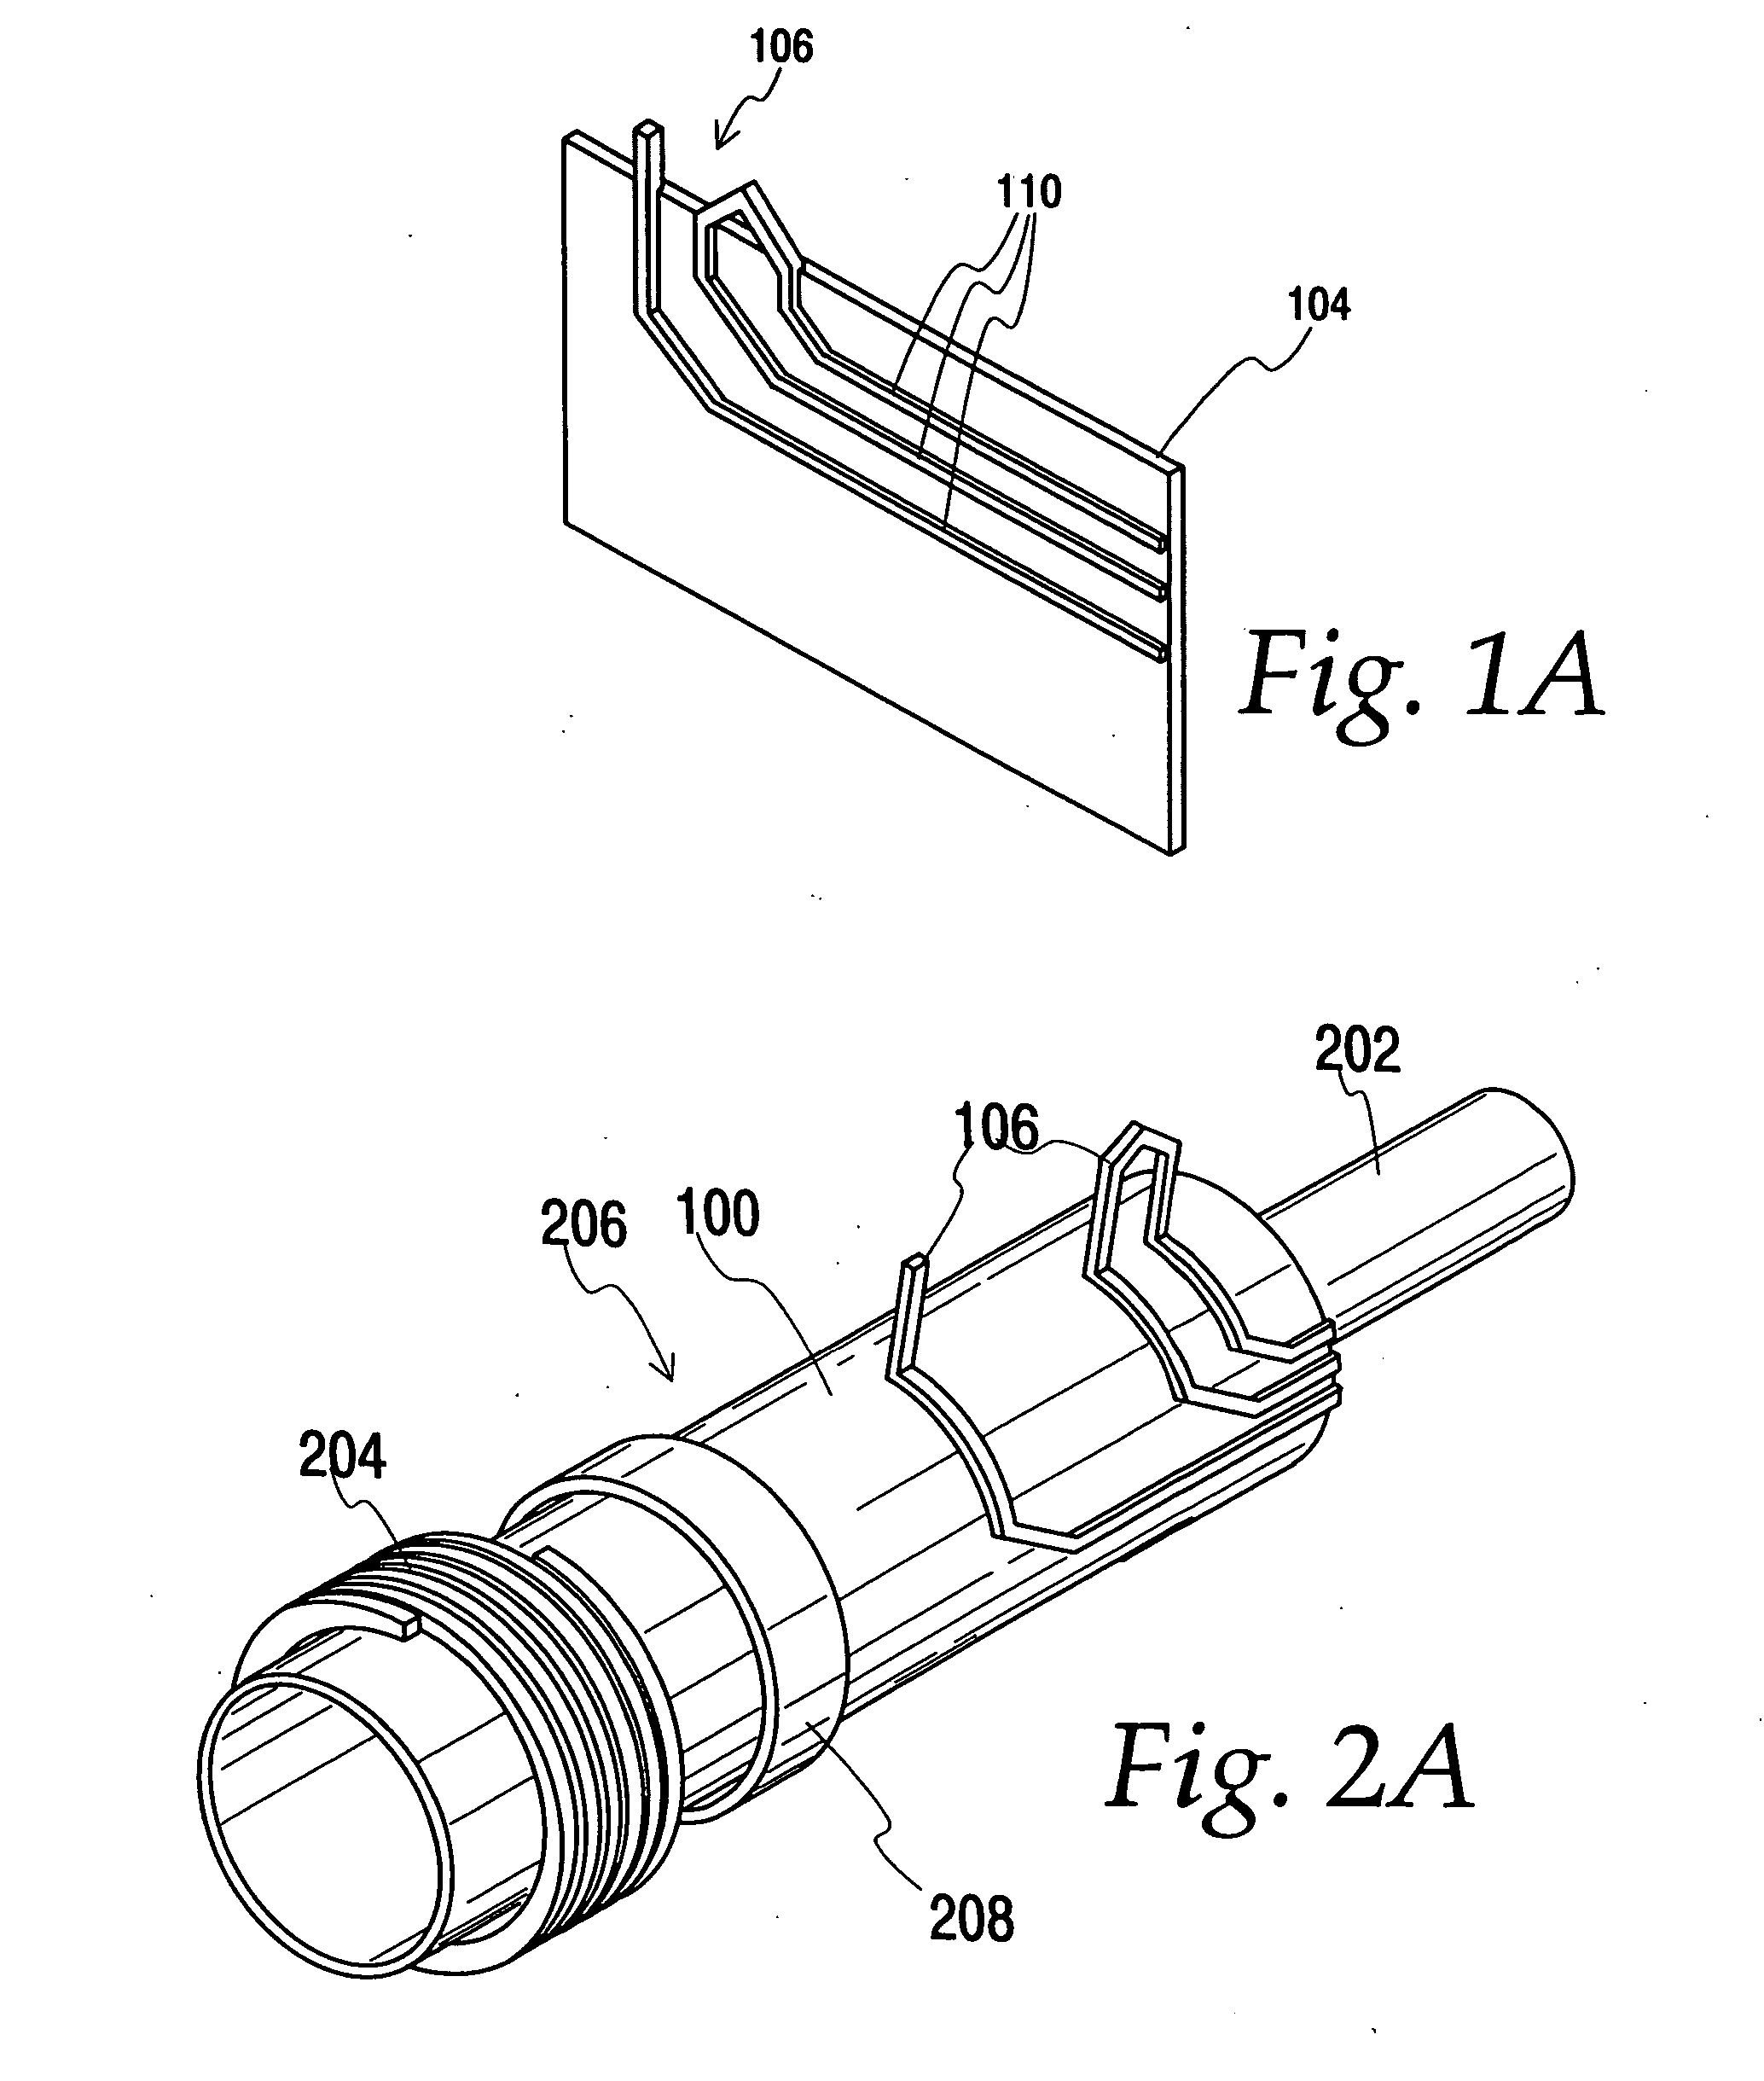 System and method for performing ablation and other medical procedures using an electrode array with flex circuit